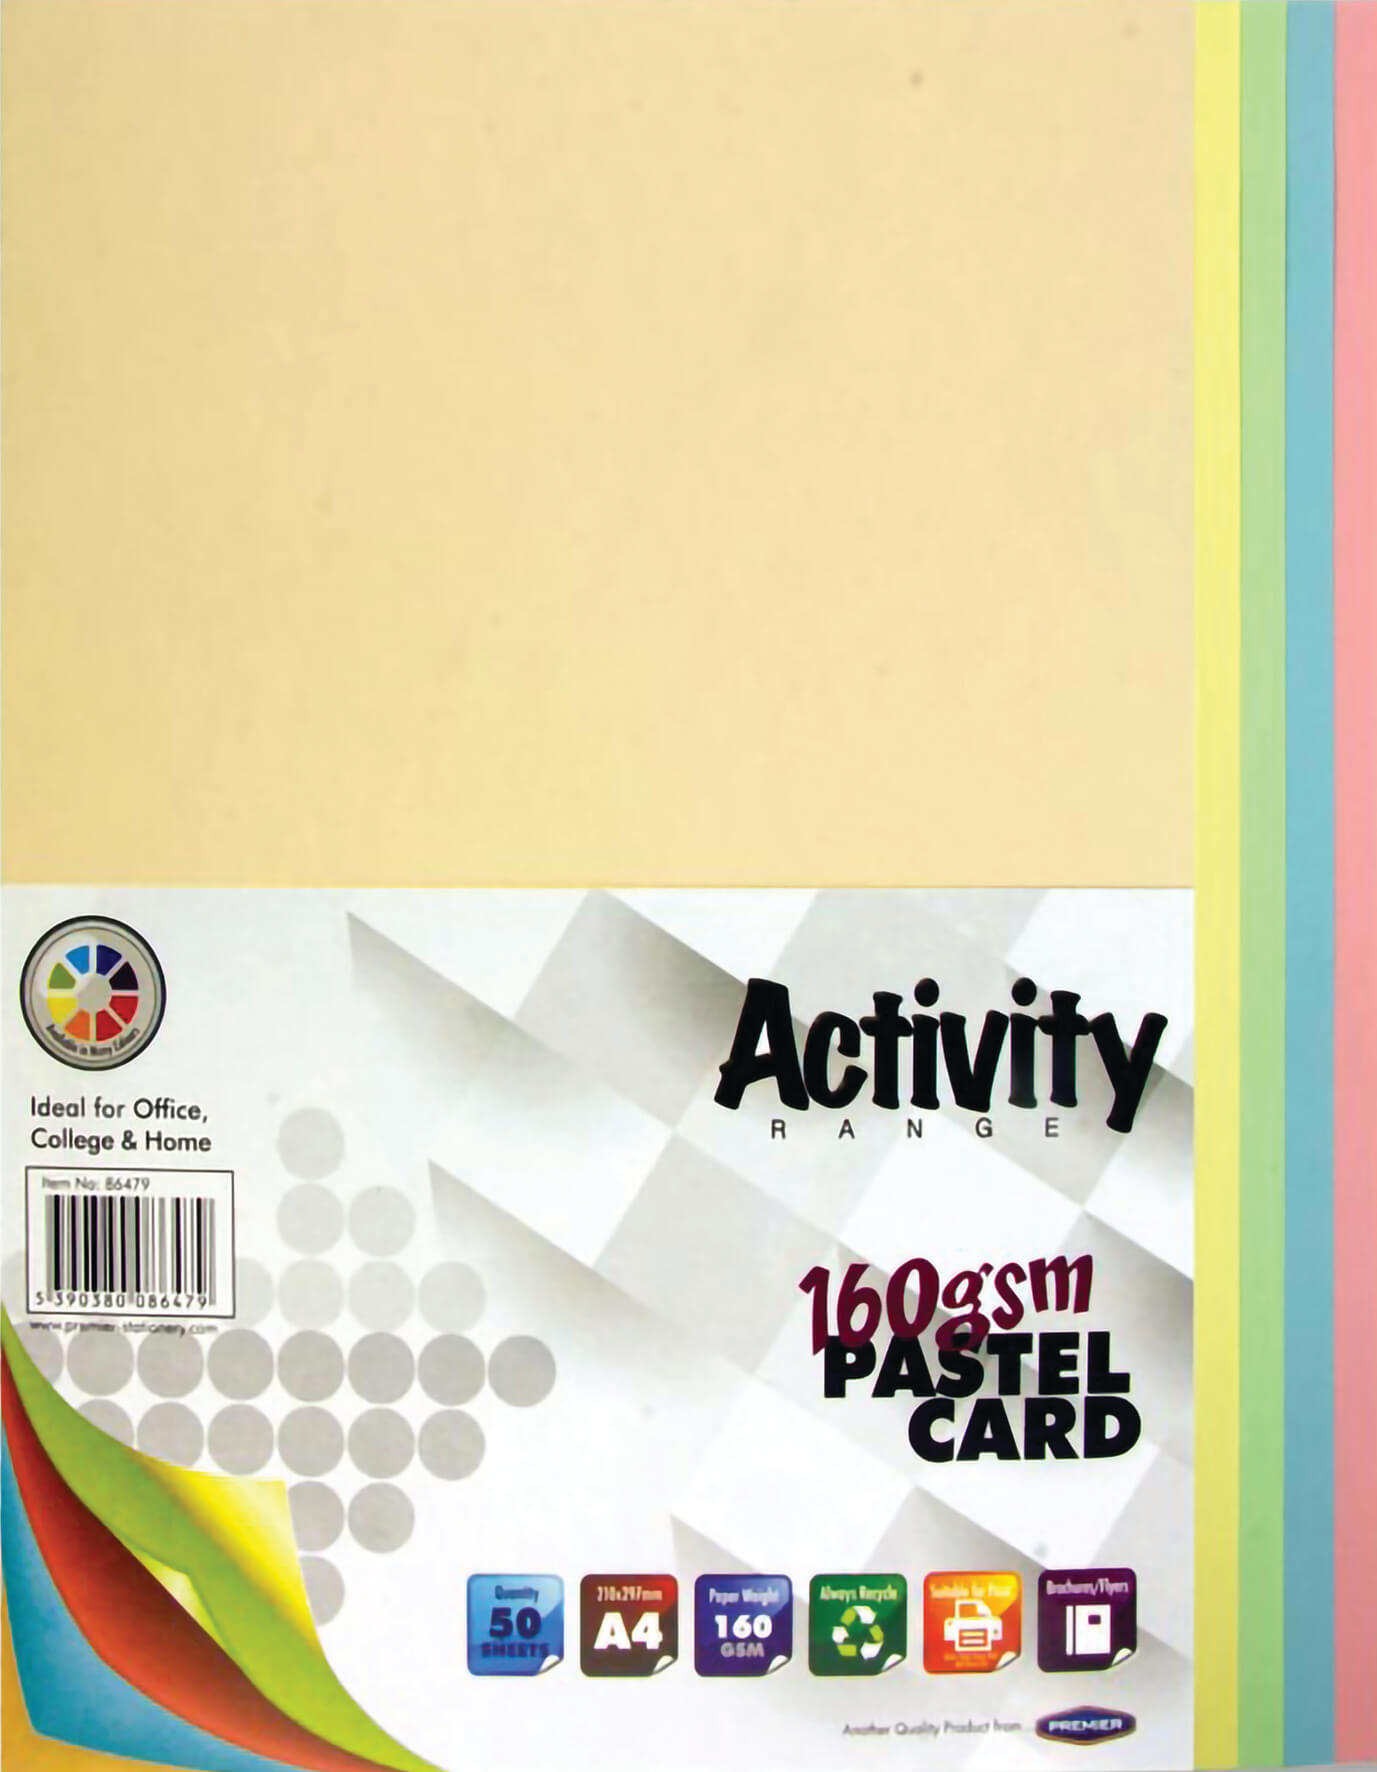 Card Pastel A4 160gsm - 50 Sheets